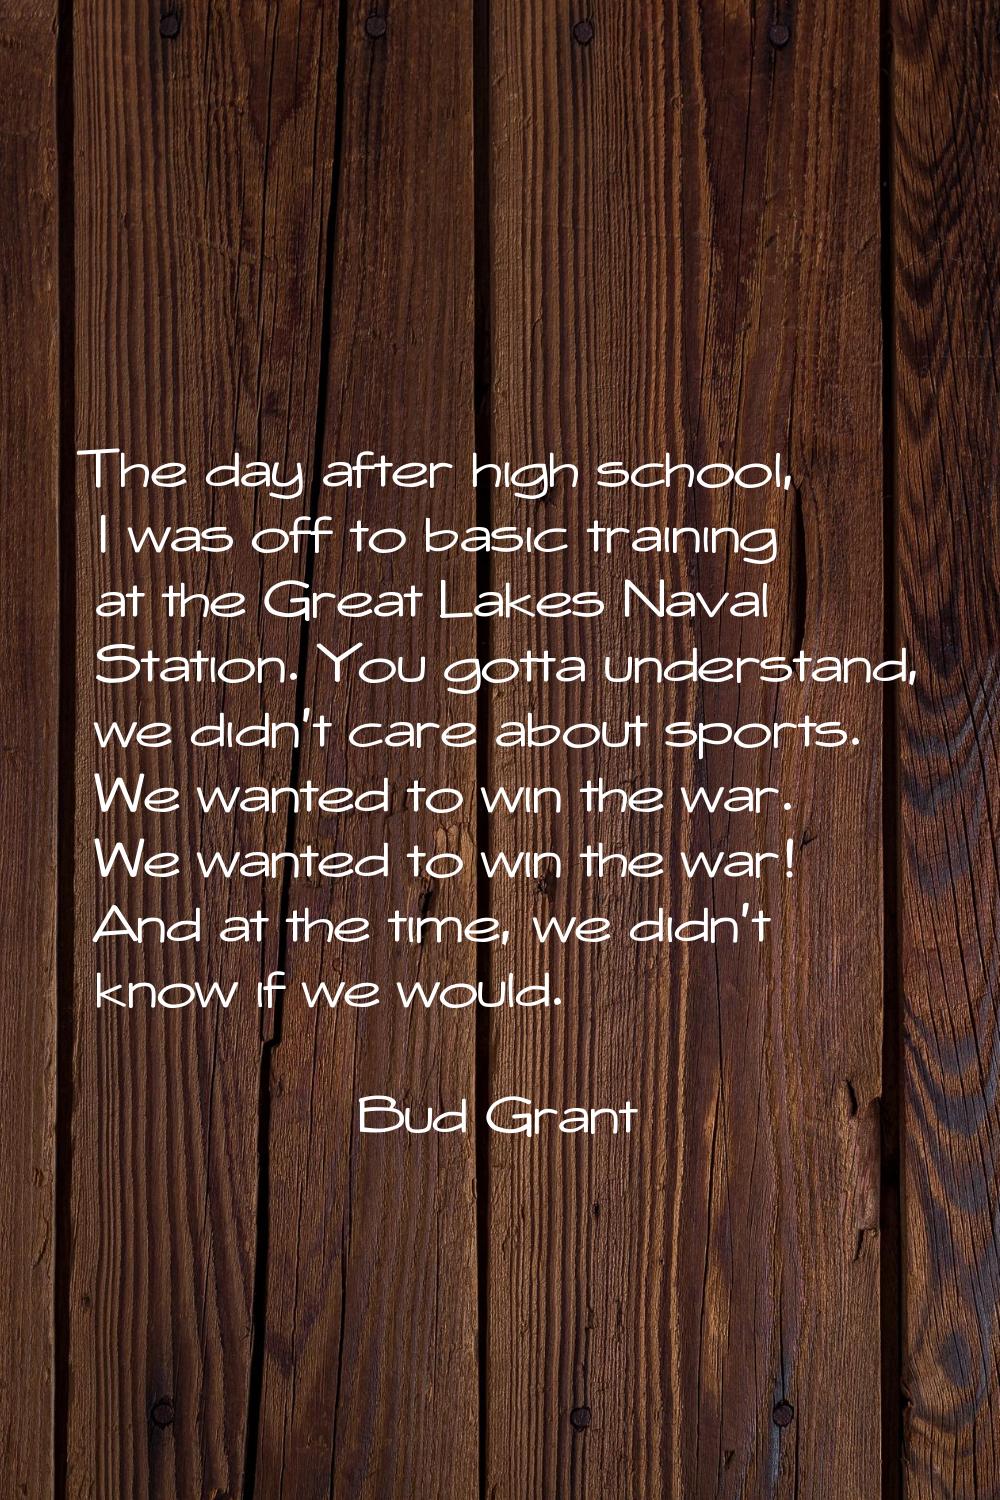 The day after high school, I was off to basic training at the Great Lakes Naval Station. You gotta 